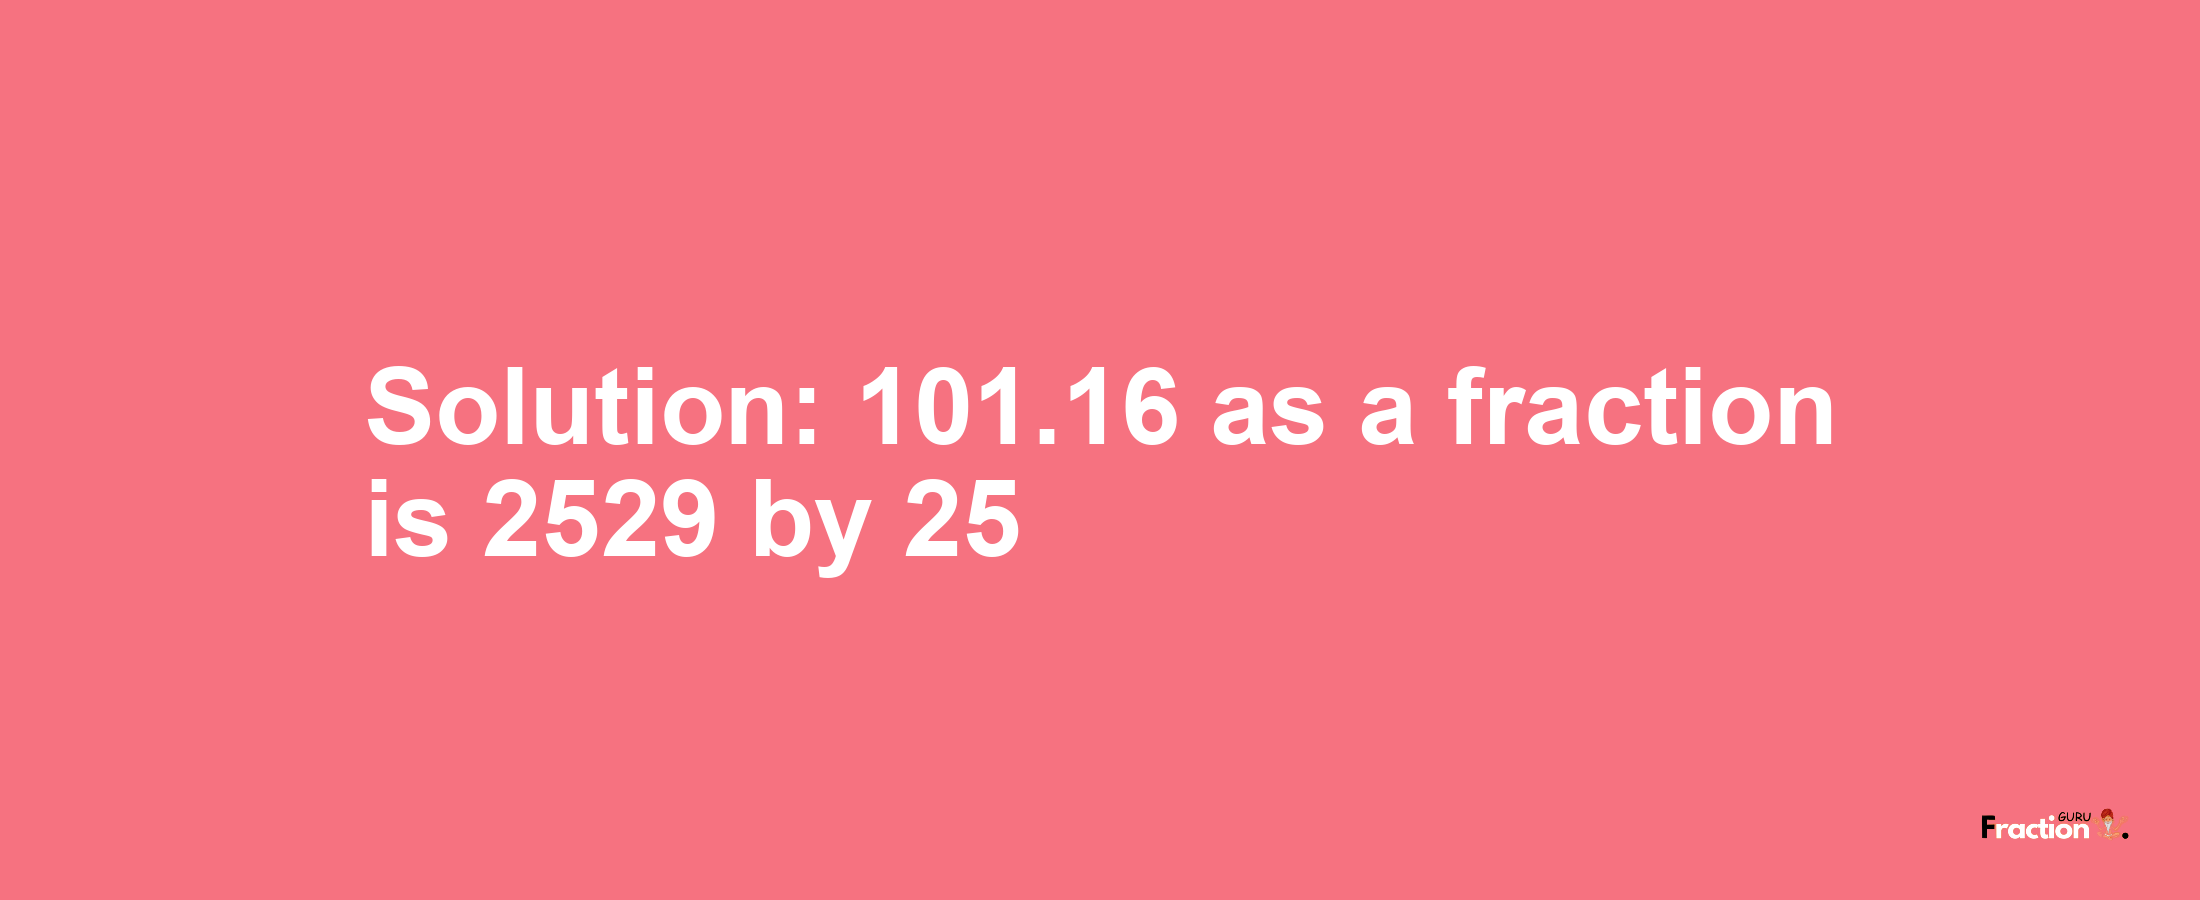 Solution:101.16 as a fraction is 2529/25